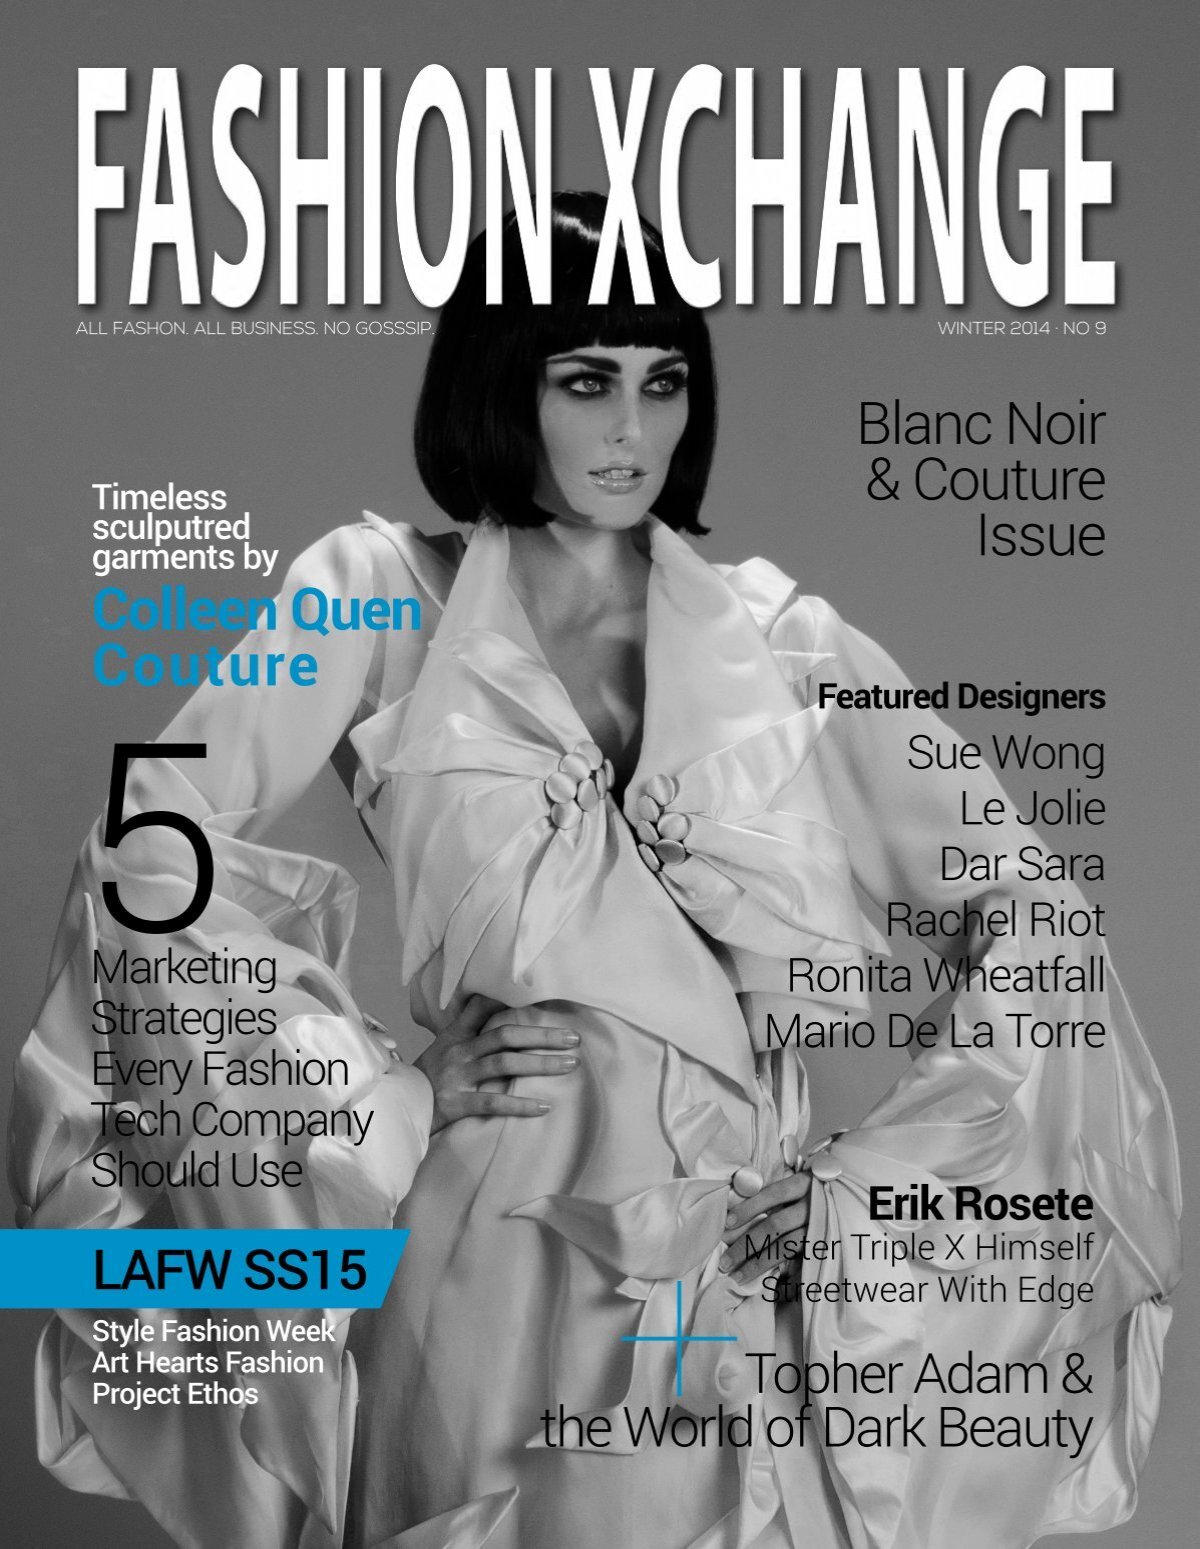 Blanc Noir & Couture: Issue No.9